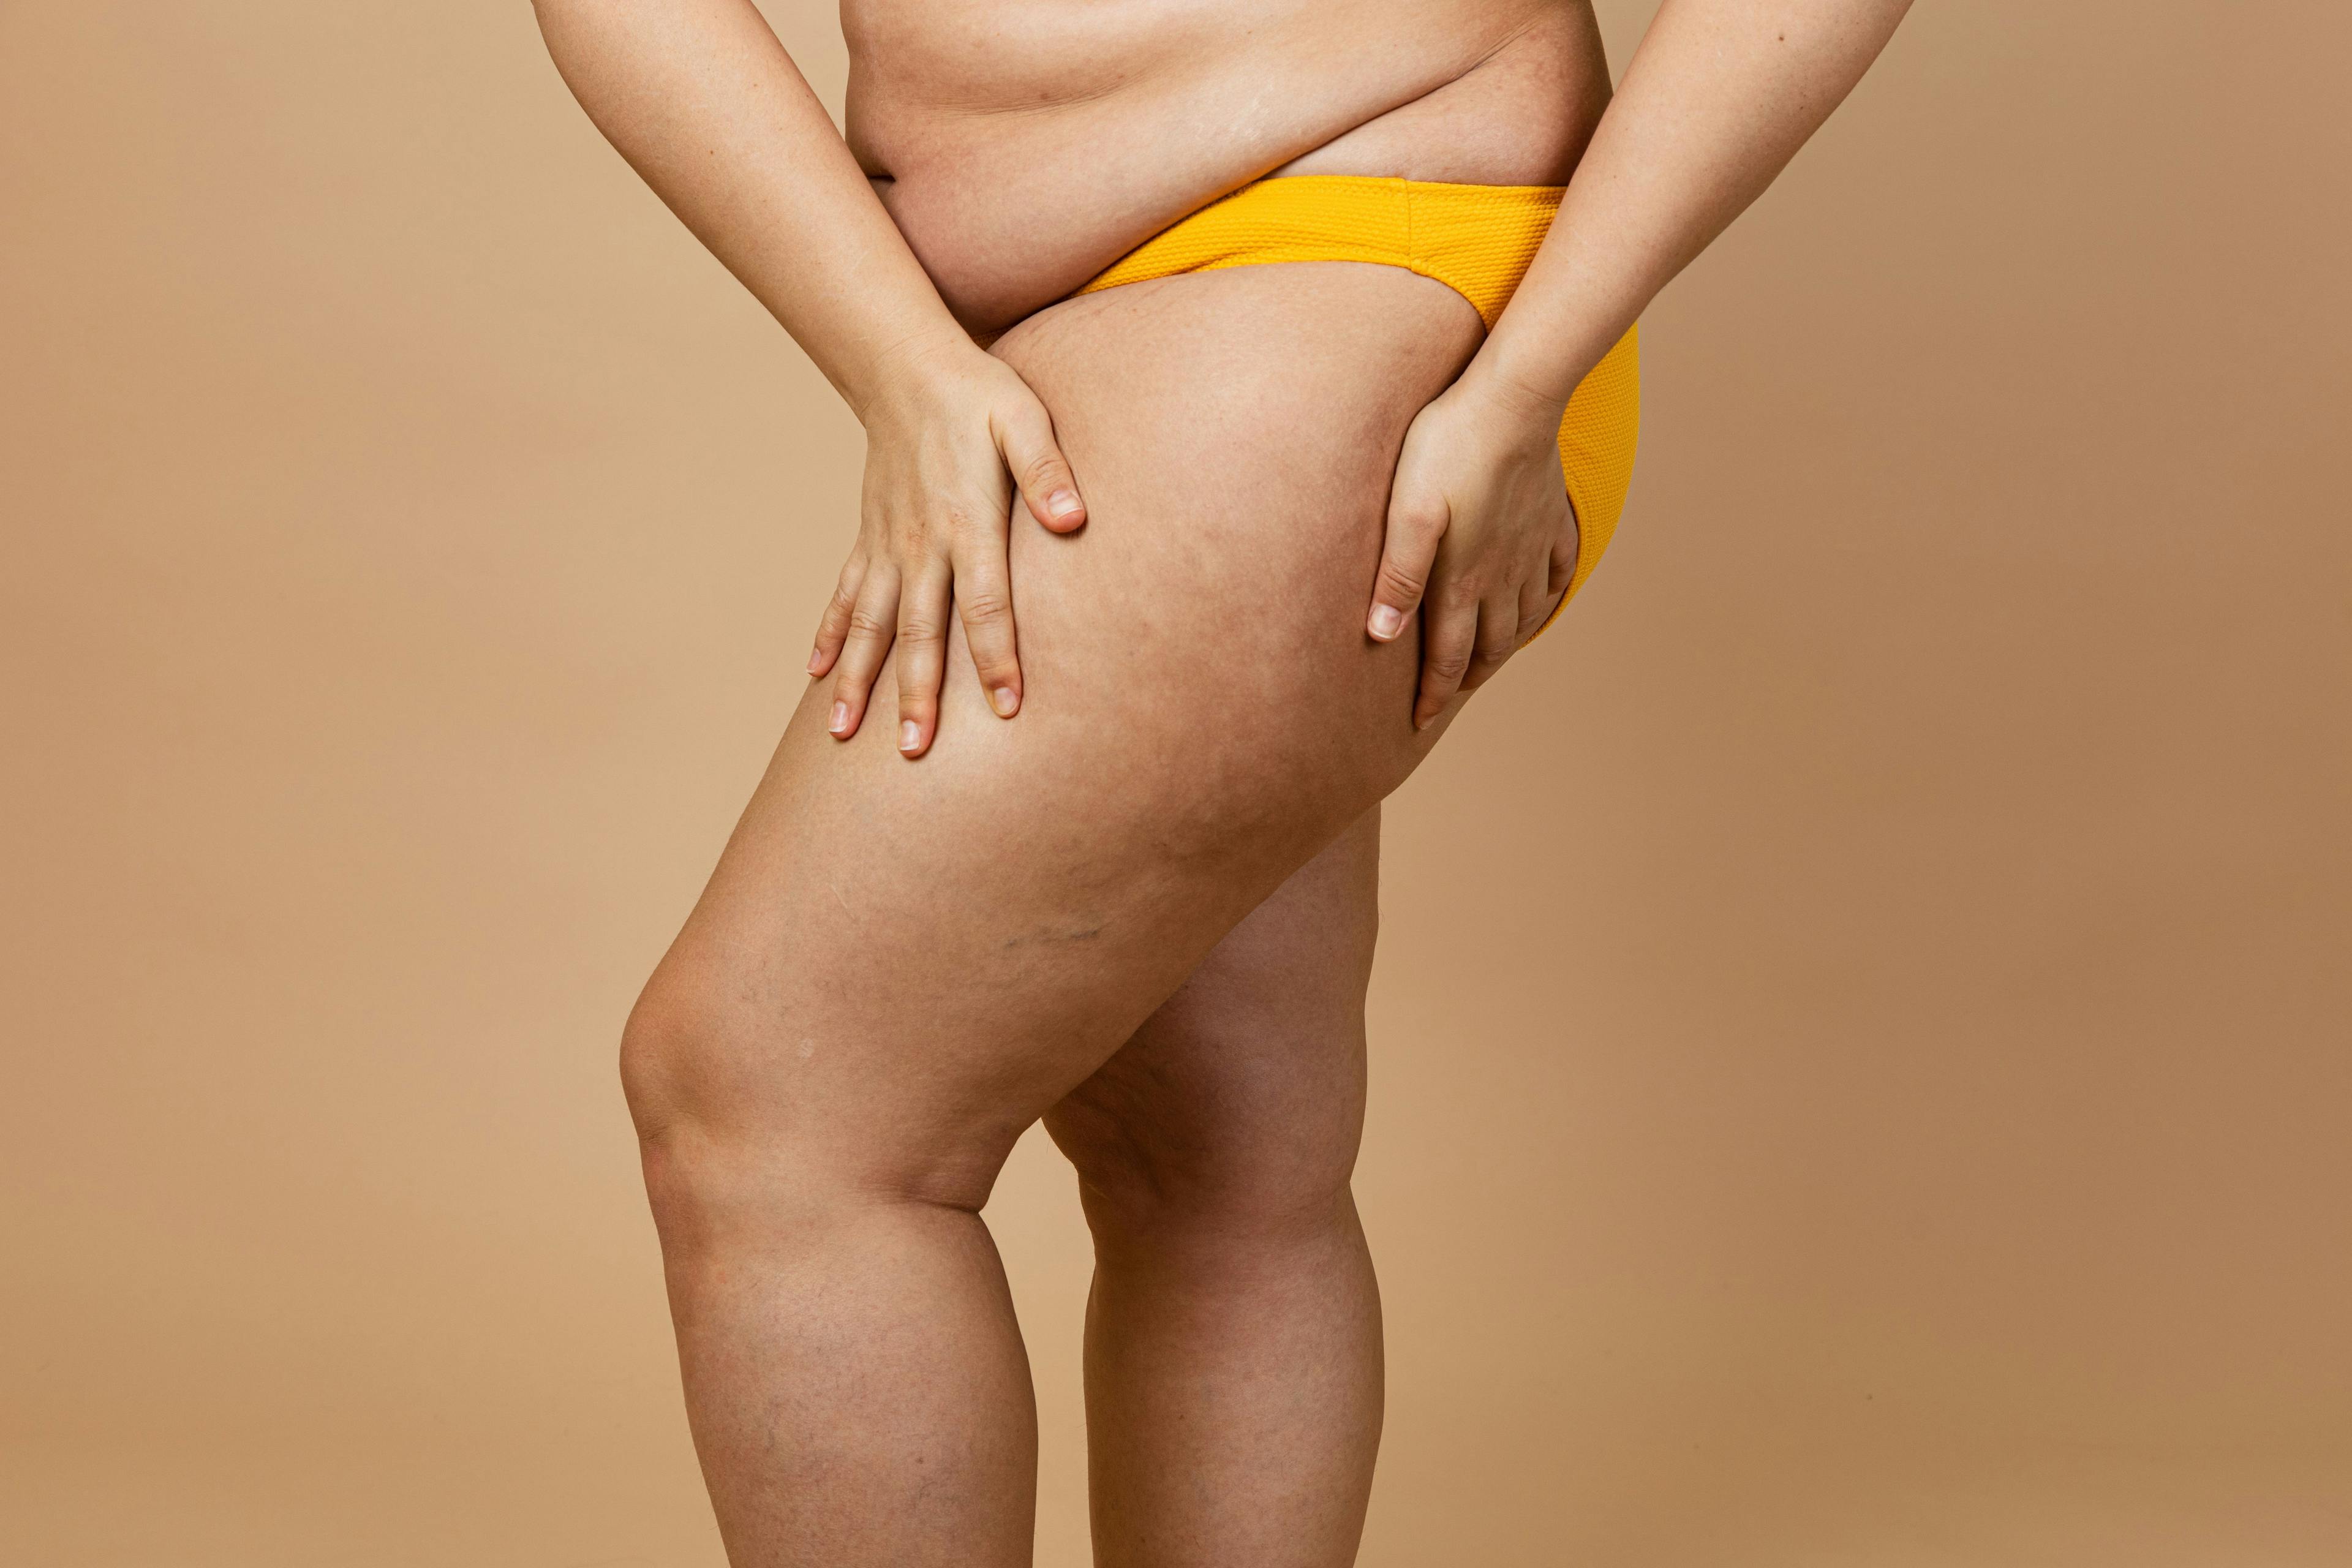 Midlife overweight status linked to higher morbidity 